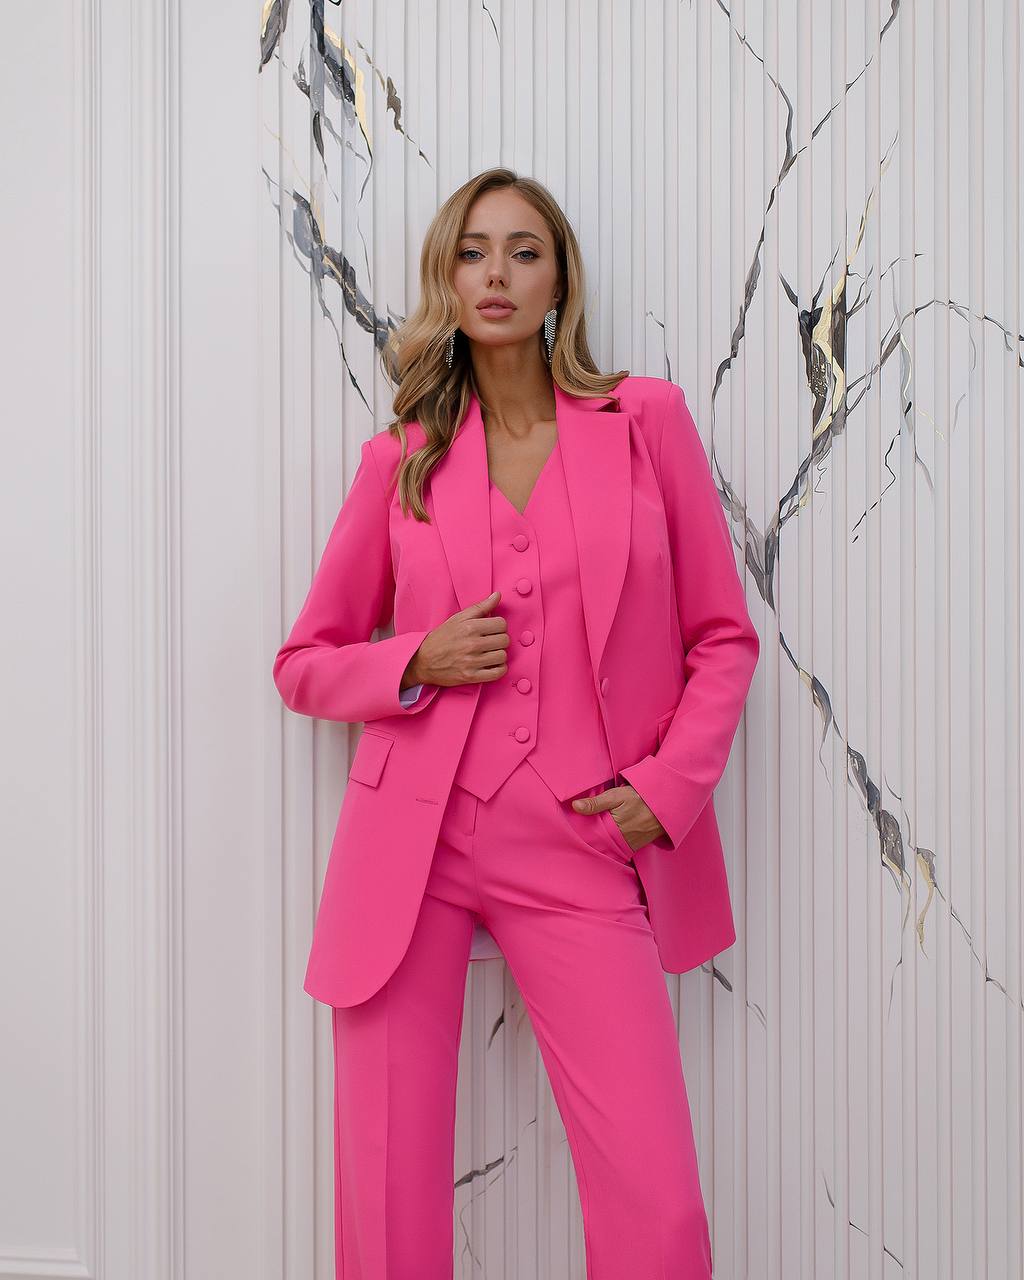 a woman in a pink suit leaning against a wall